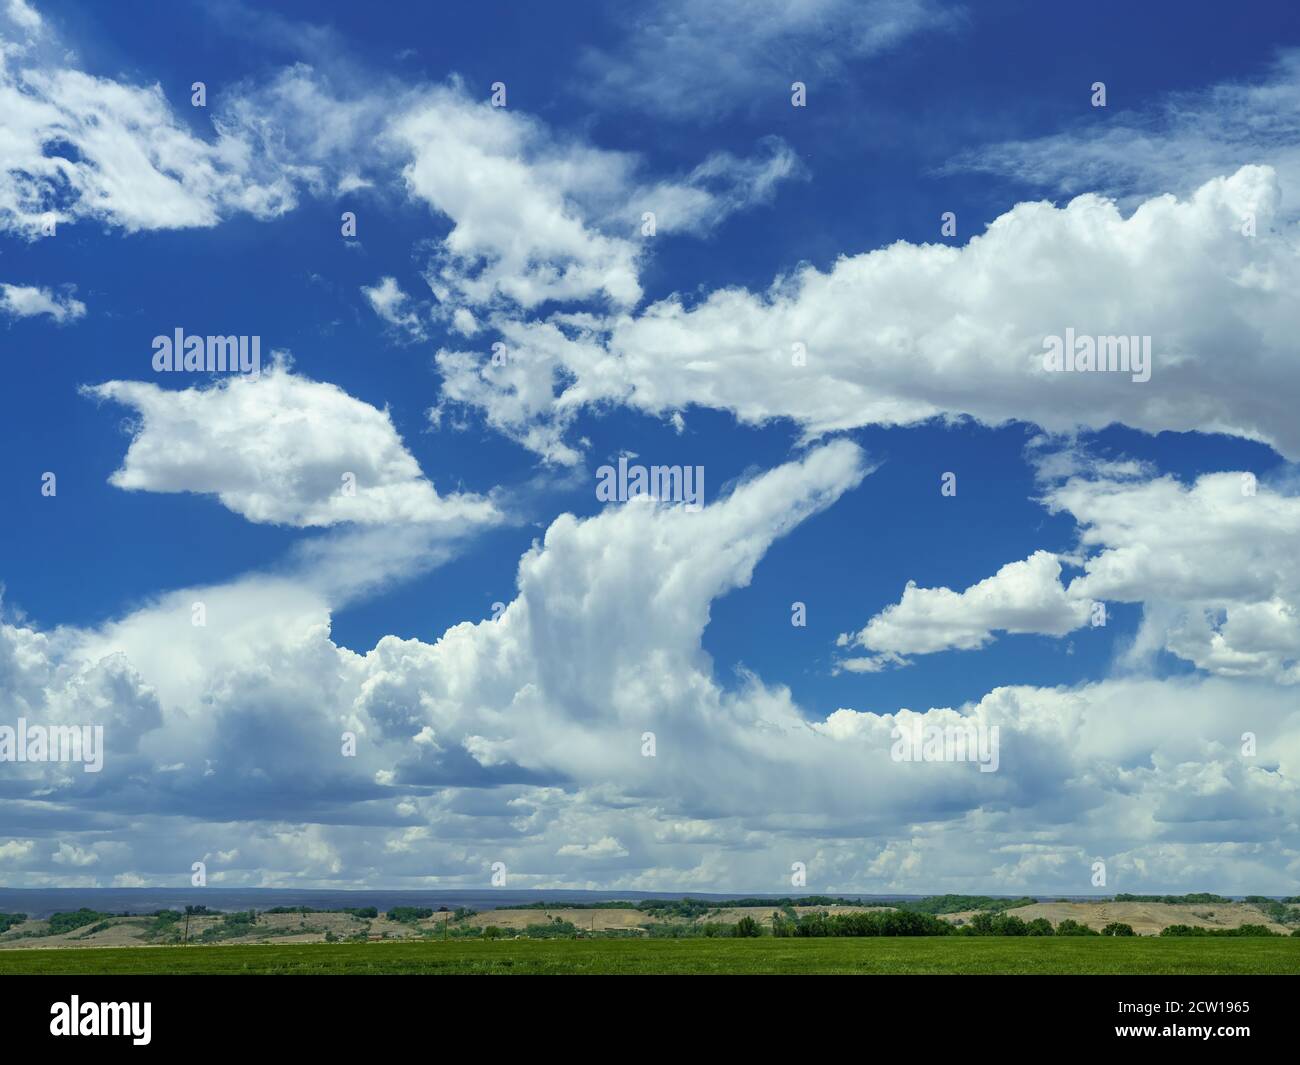 Interesting cloud formation Stock Photo